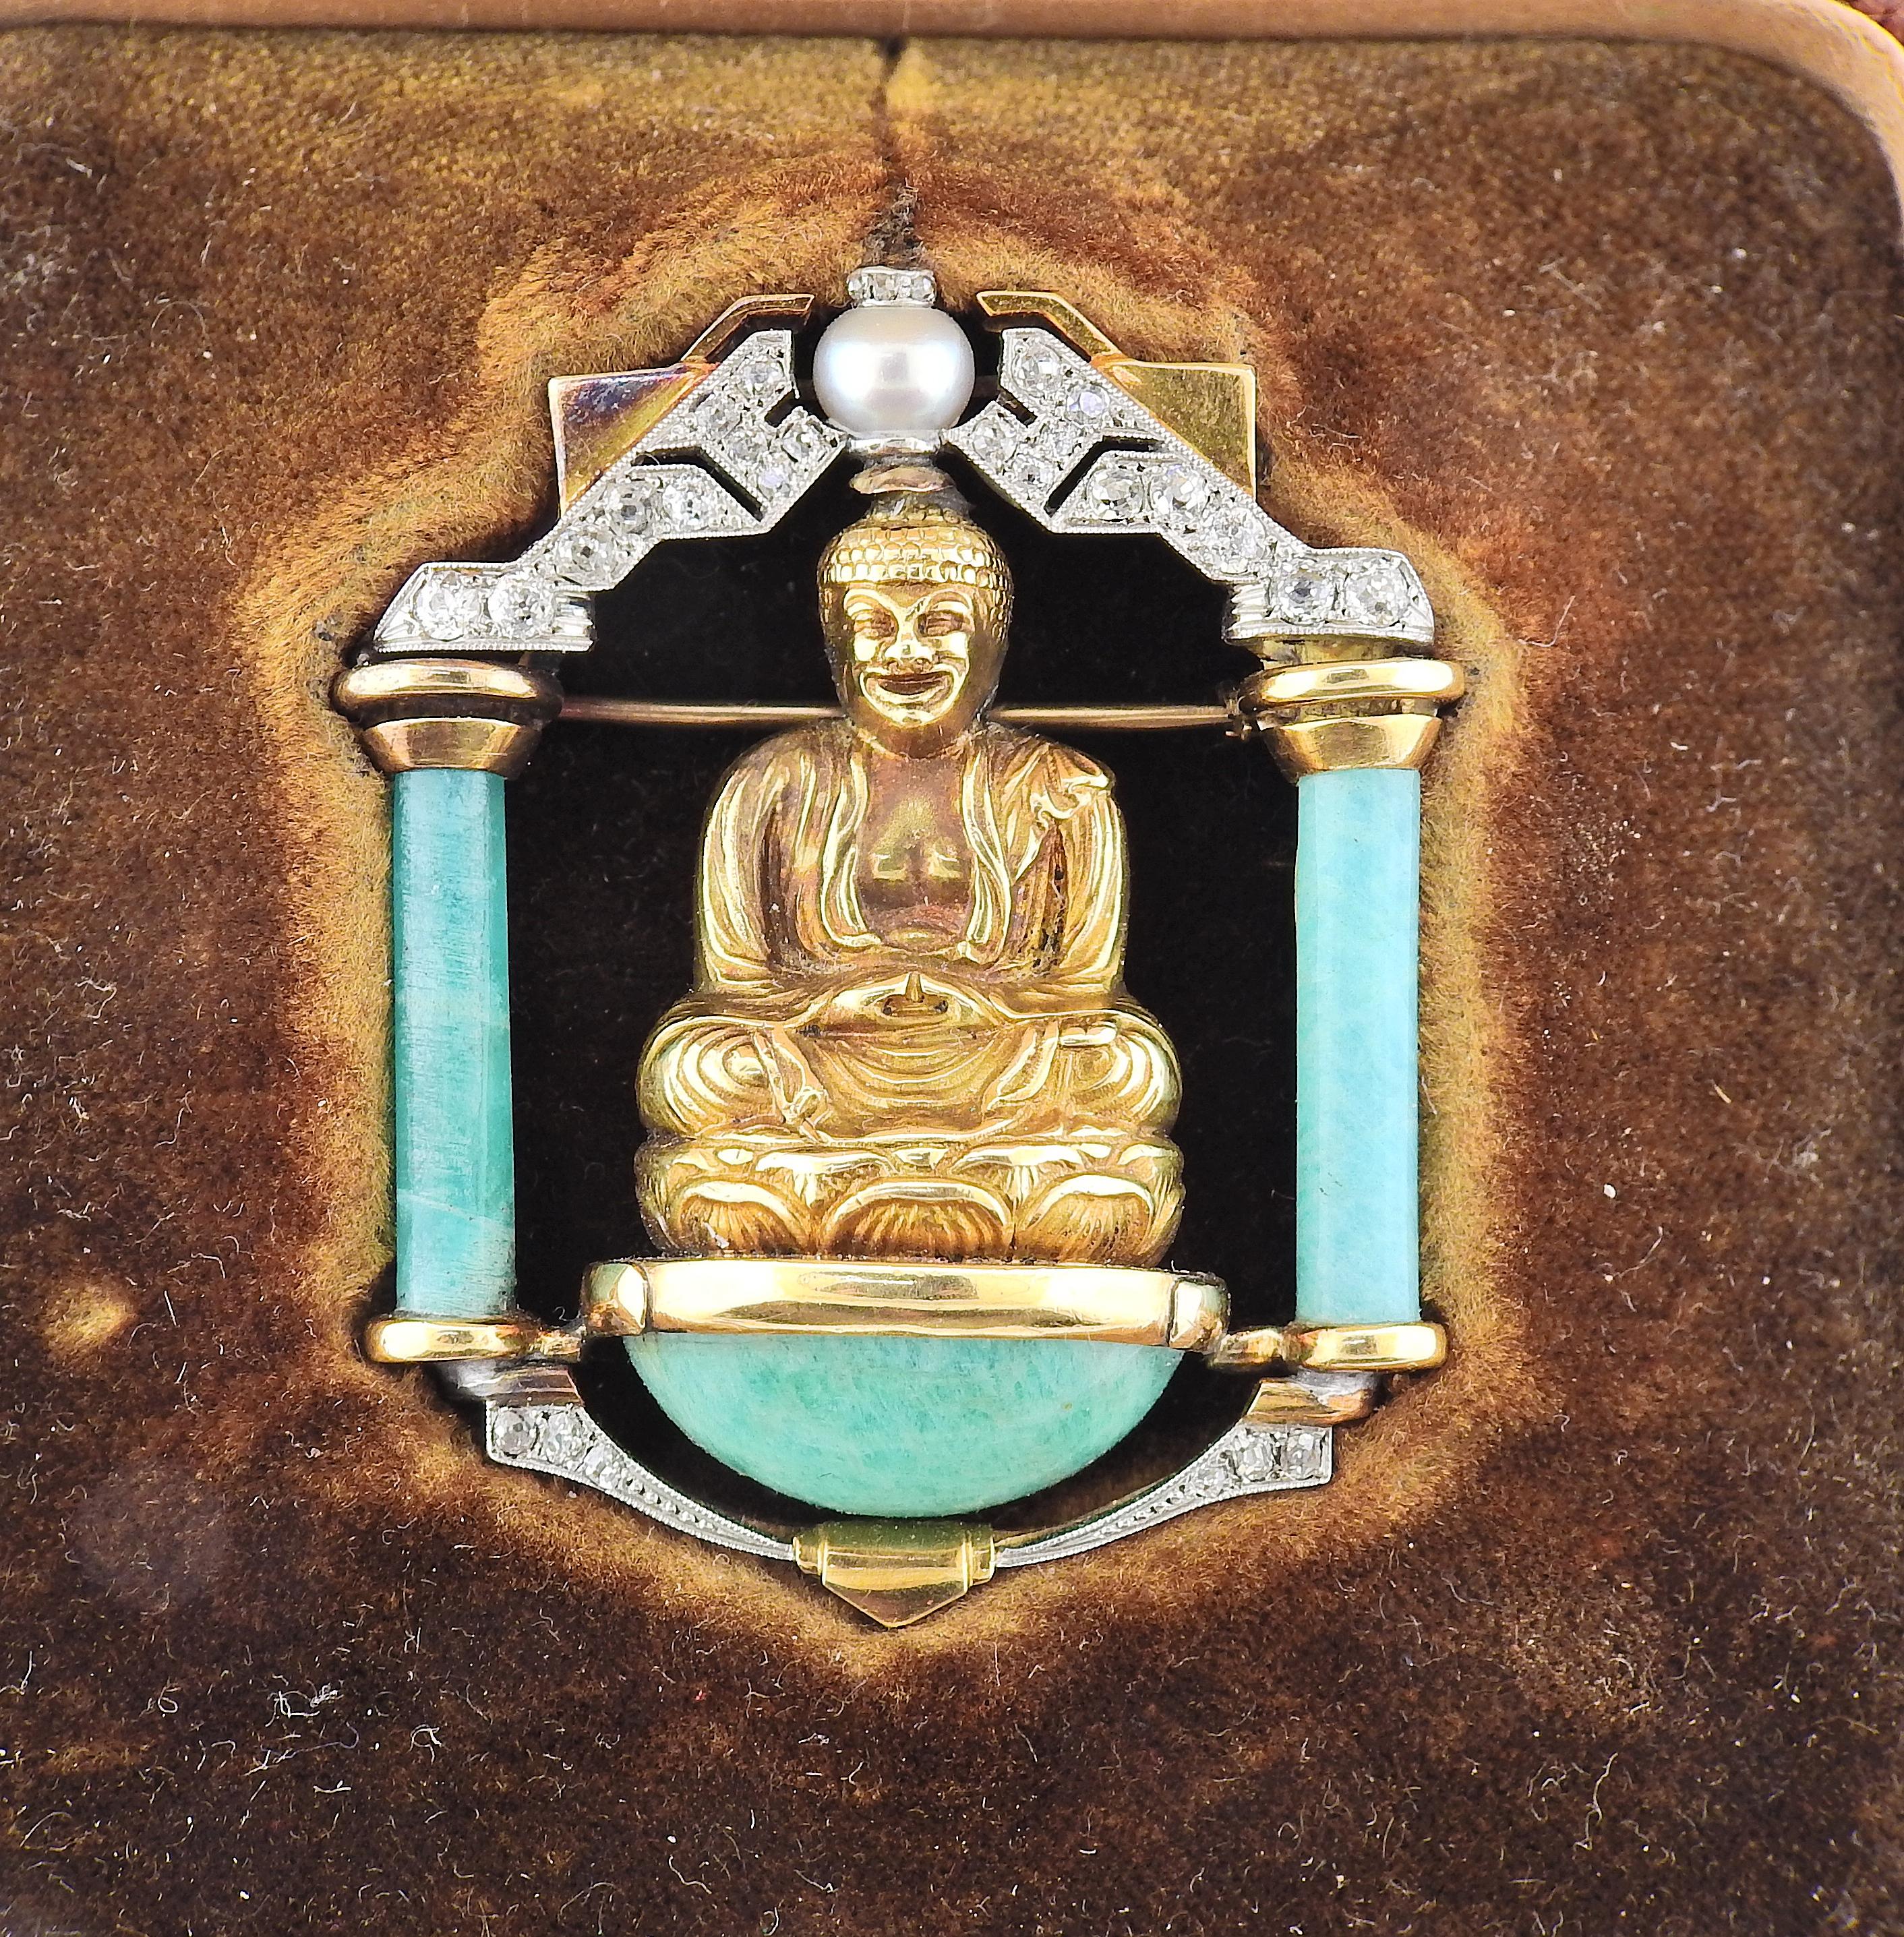 French made early Art Deco brooch, set in 18k gold and platinum, depicting Buddha, adorned with old mine cut diamonds, pearl and jade. Brooch measures 1 6/8